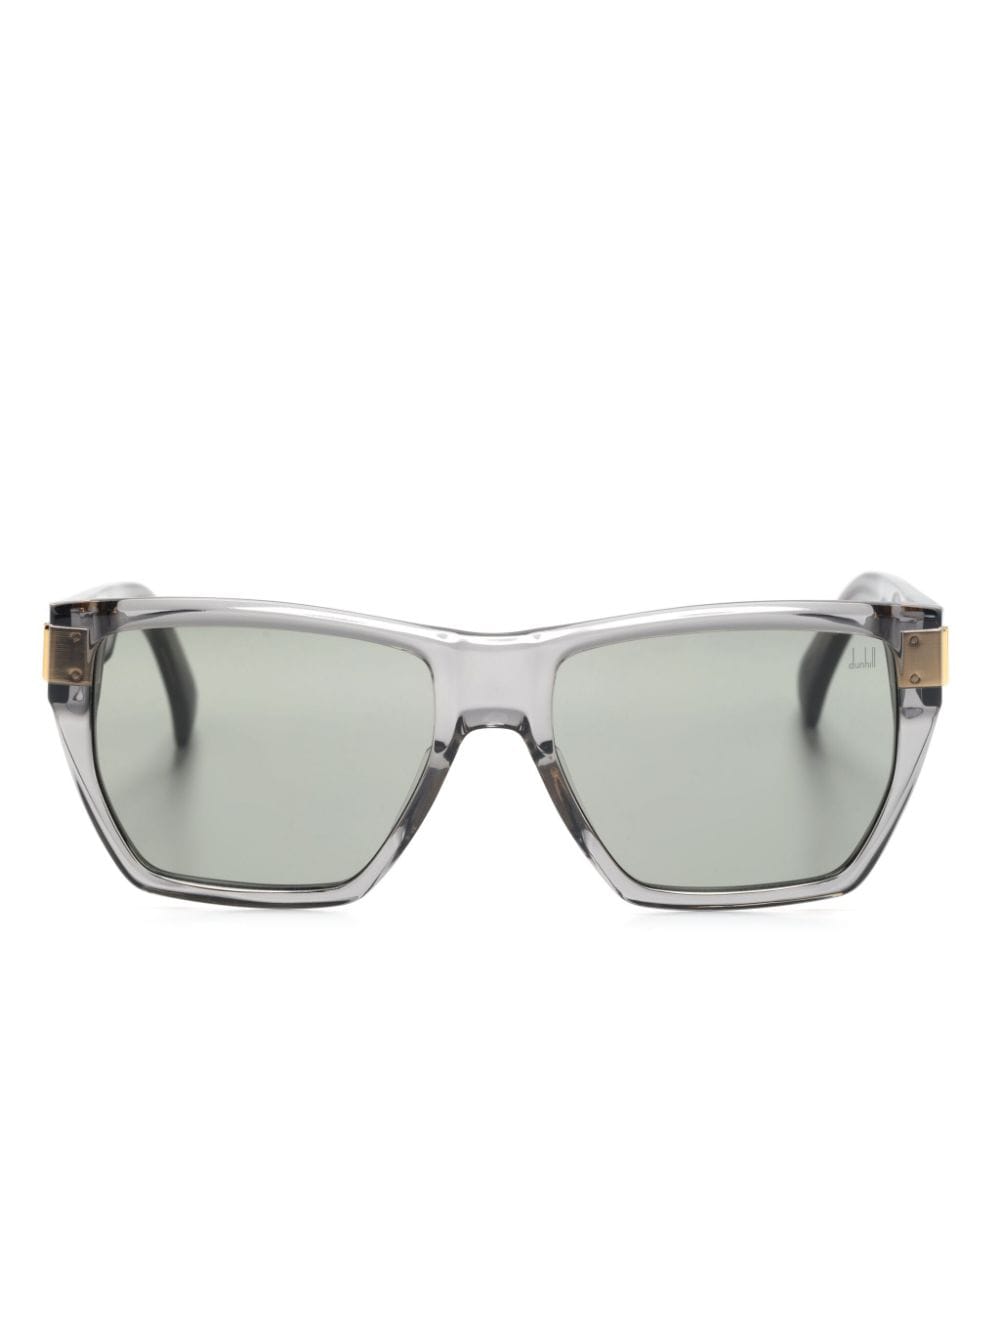 Dunhill Jagger geometric-frame sunglasses - Grey von Dunhill